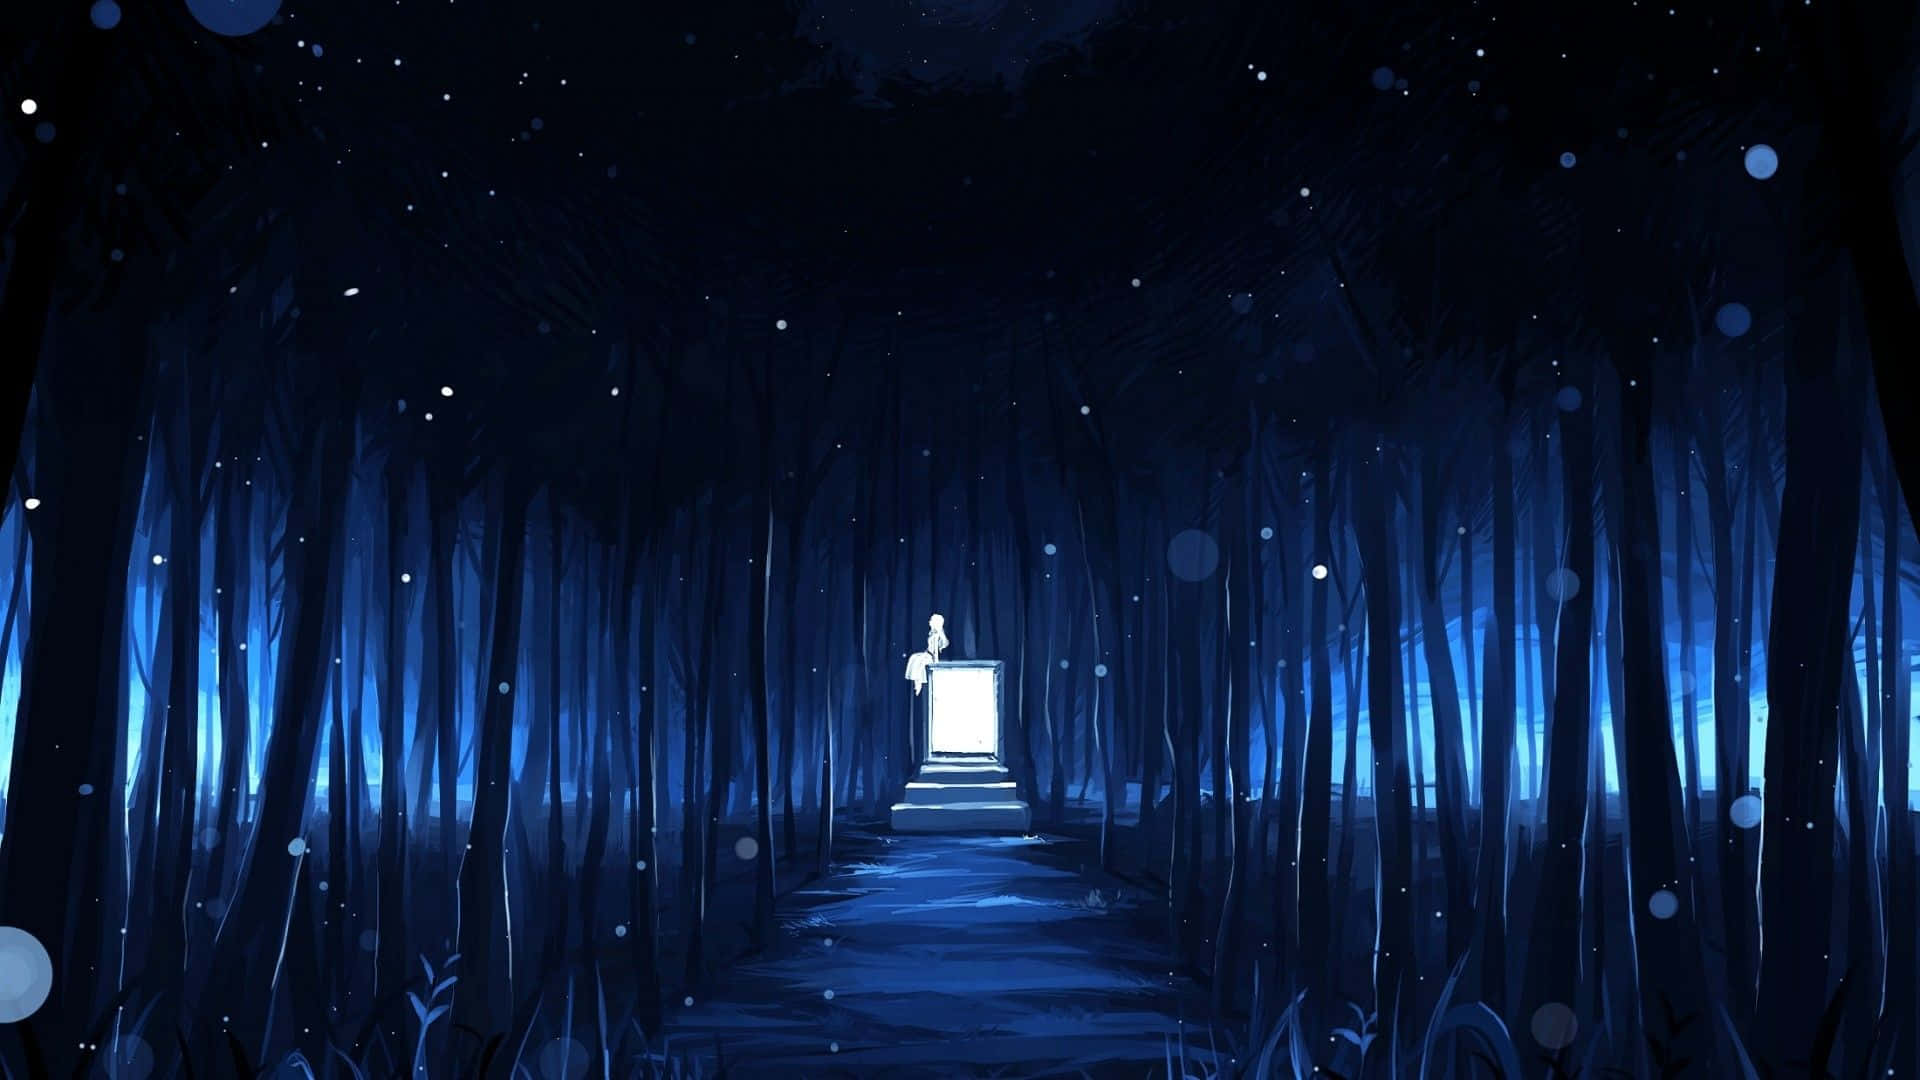 Download Anime Forest Wallpaper 